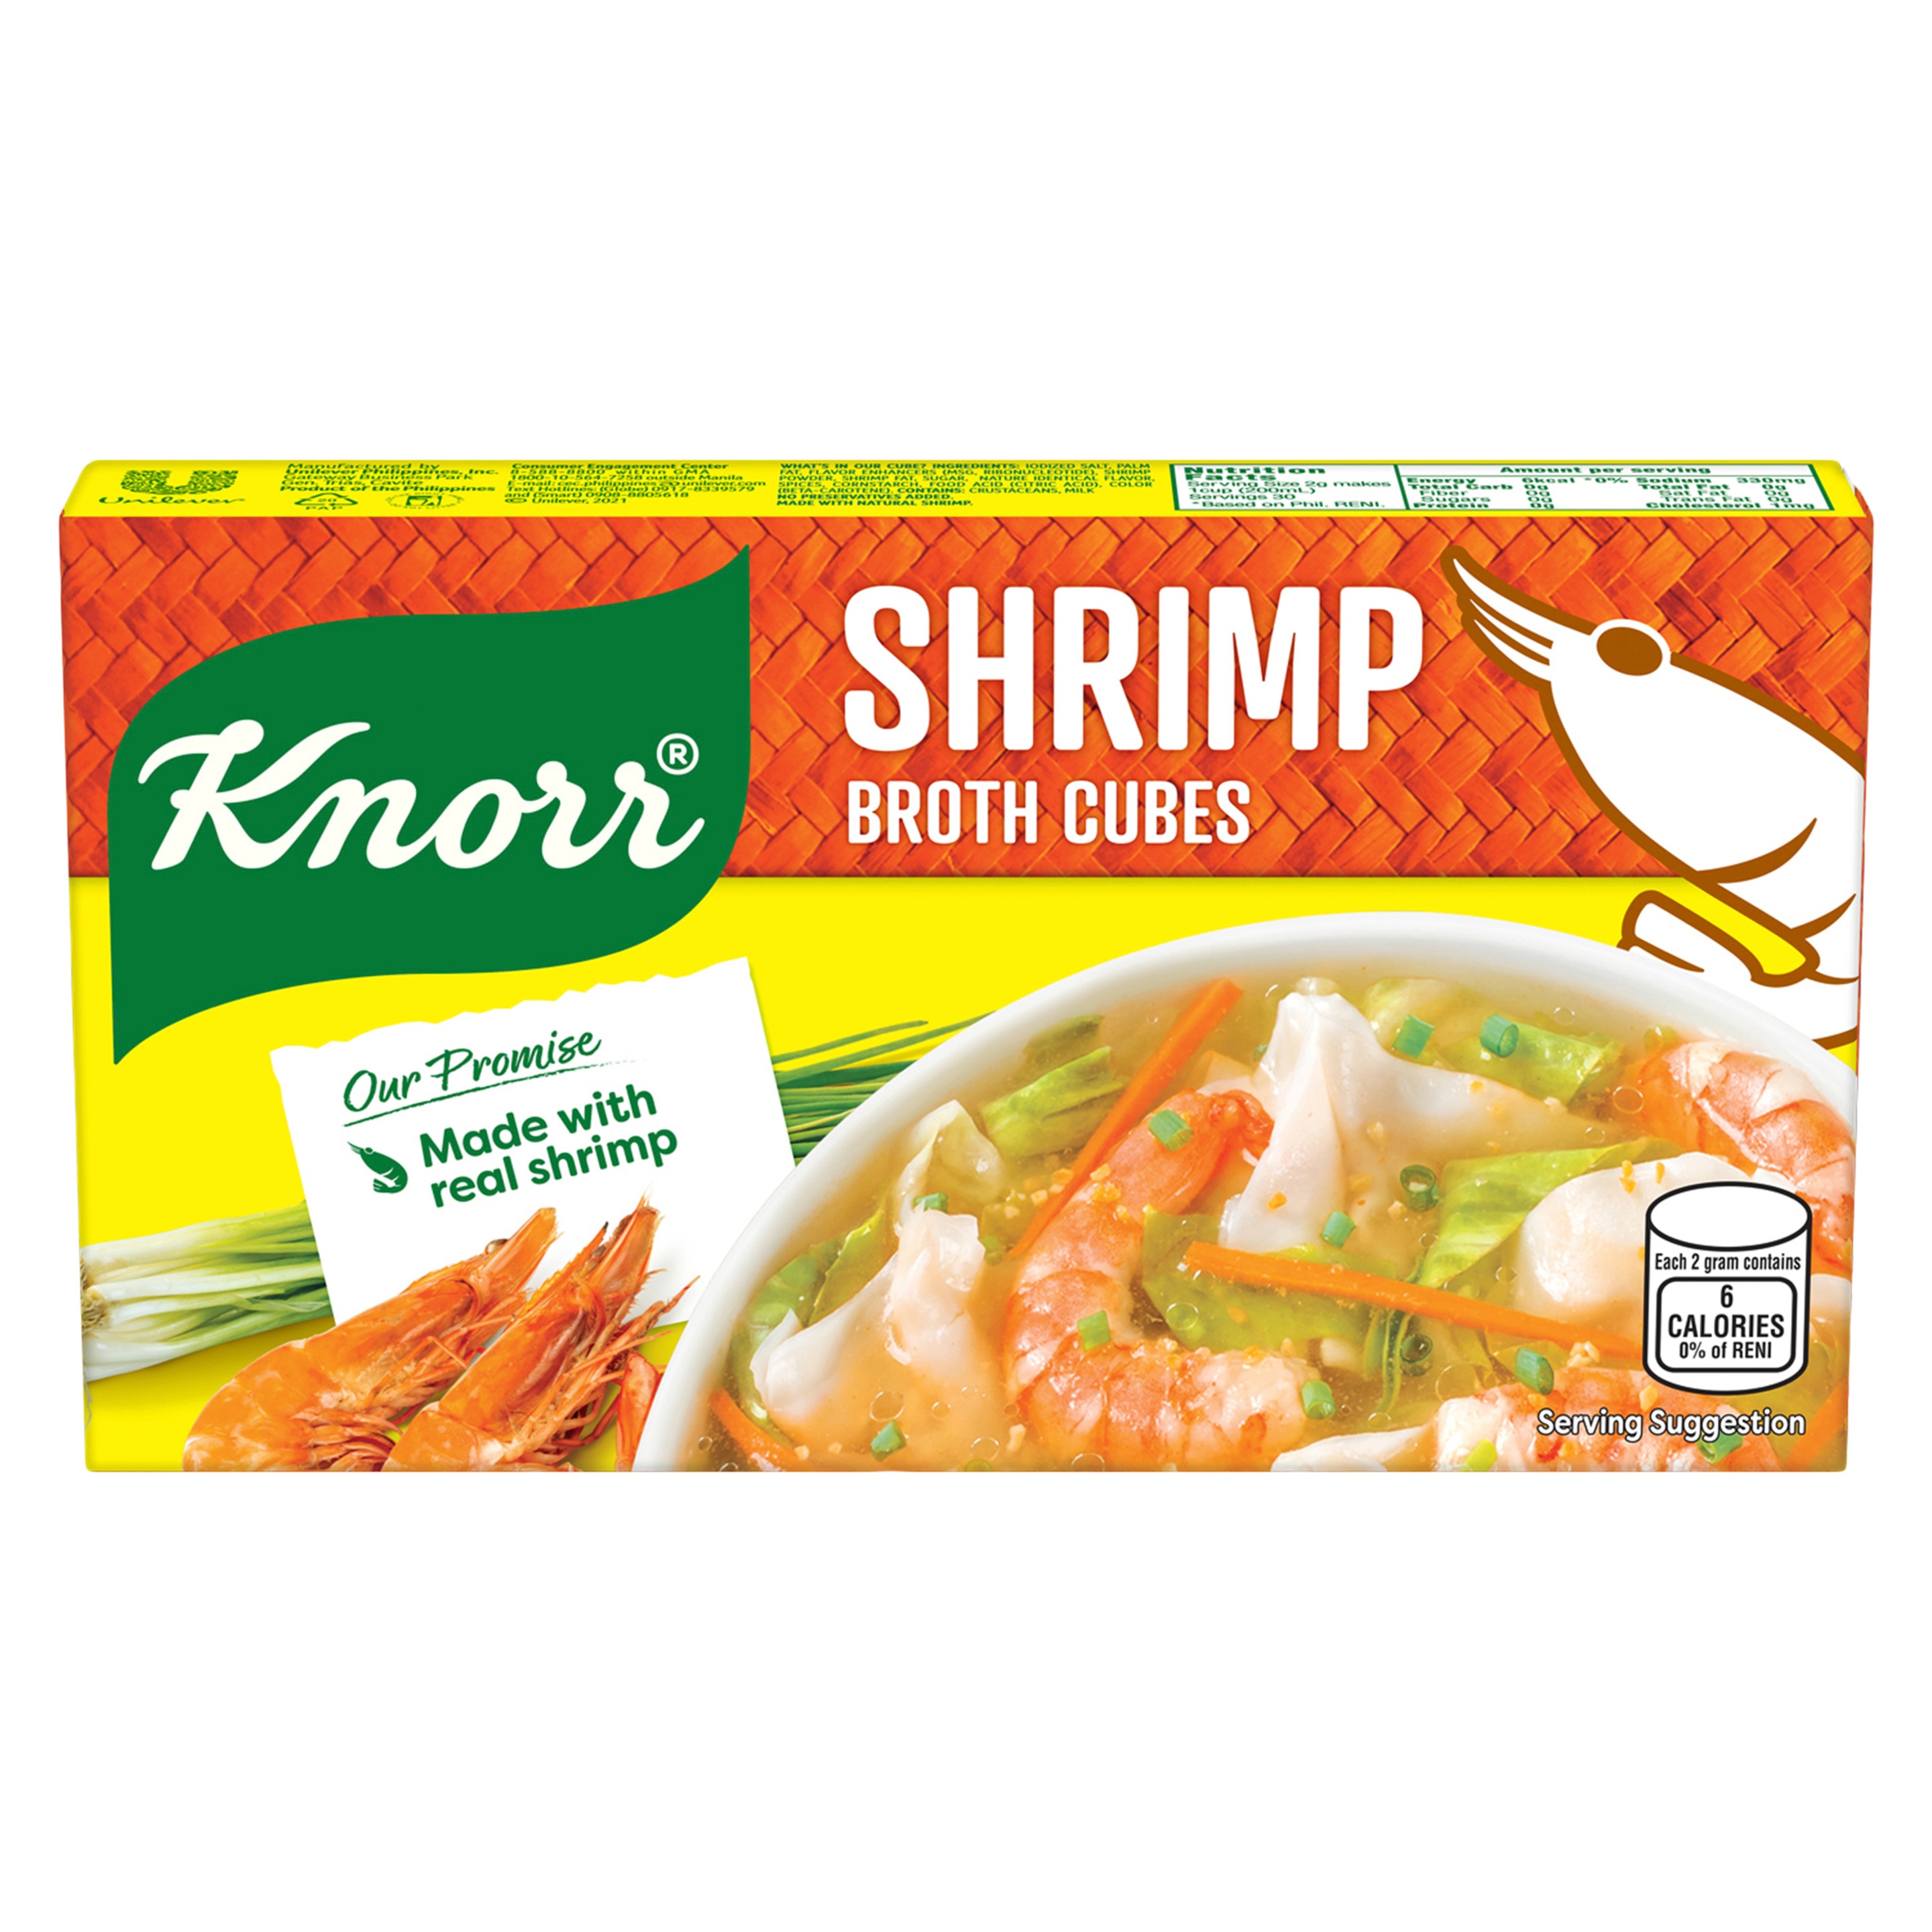 A box of Knorr shrimp Broth Cubes